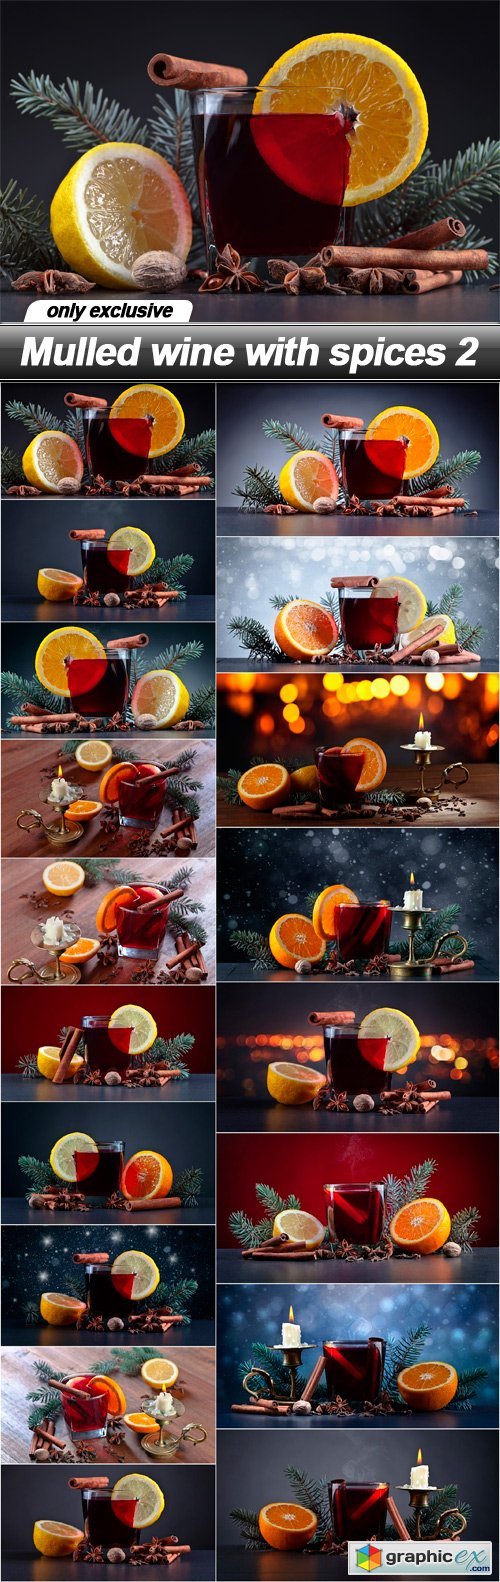 Mulled wine with spices 2 - 18 UHQ JPEG